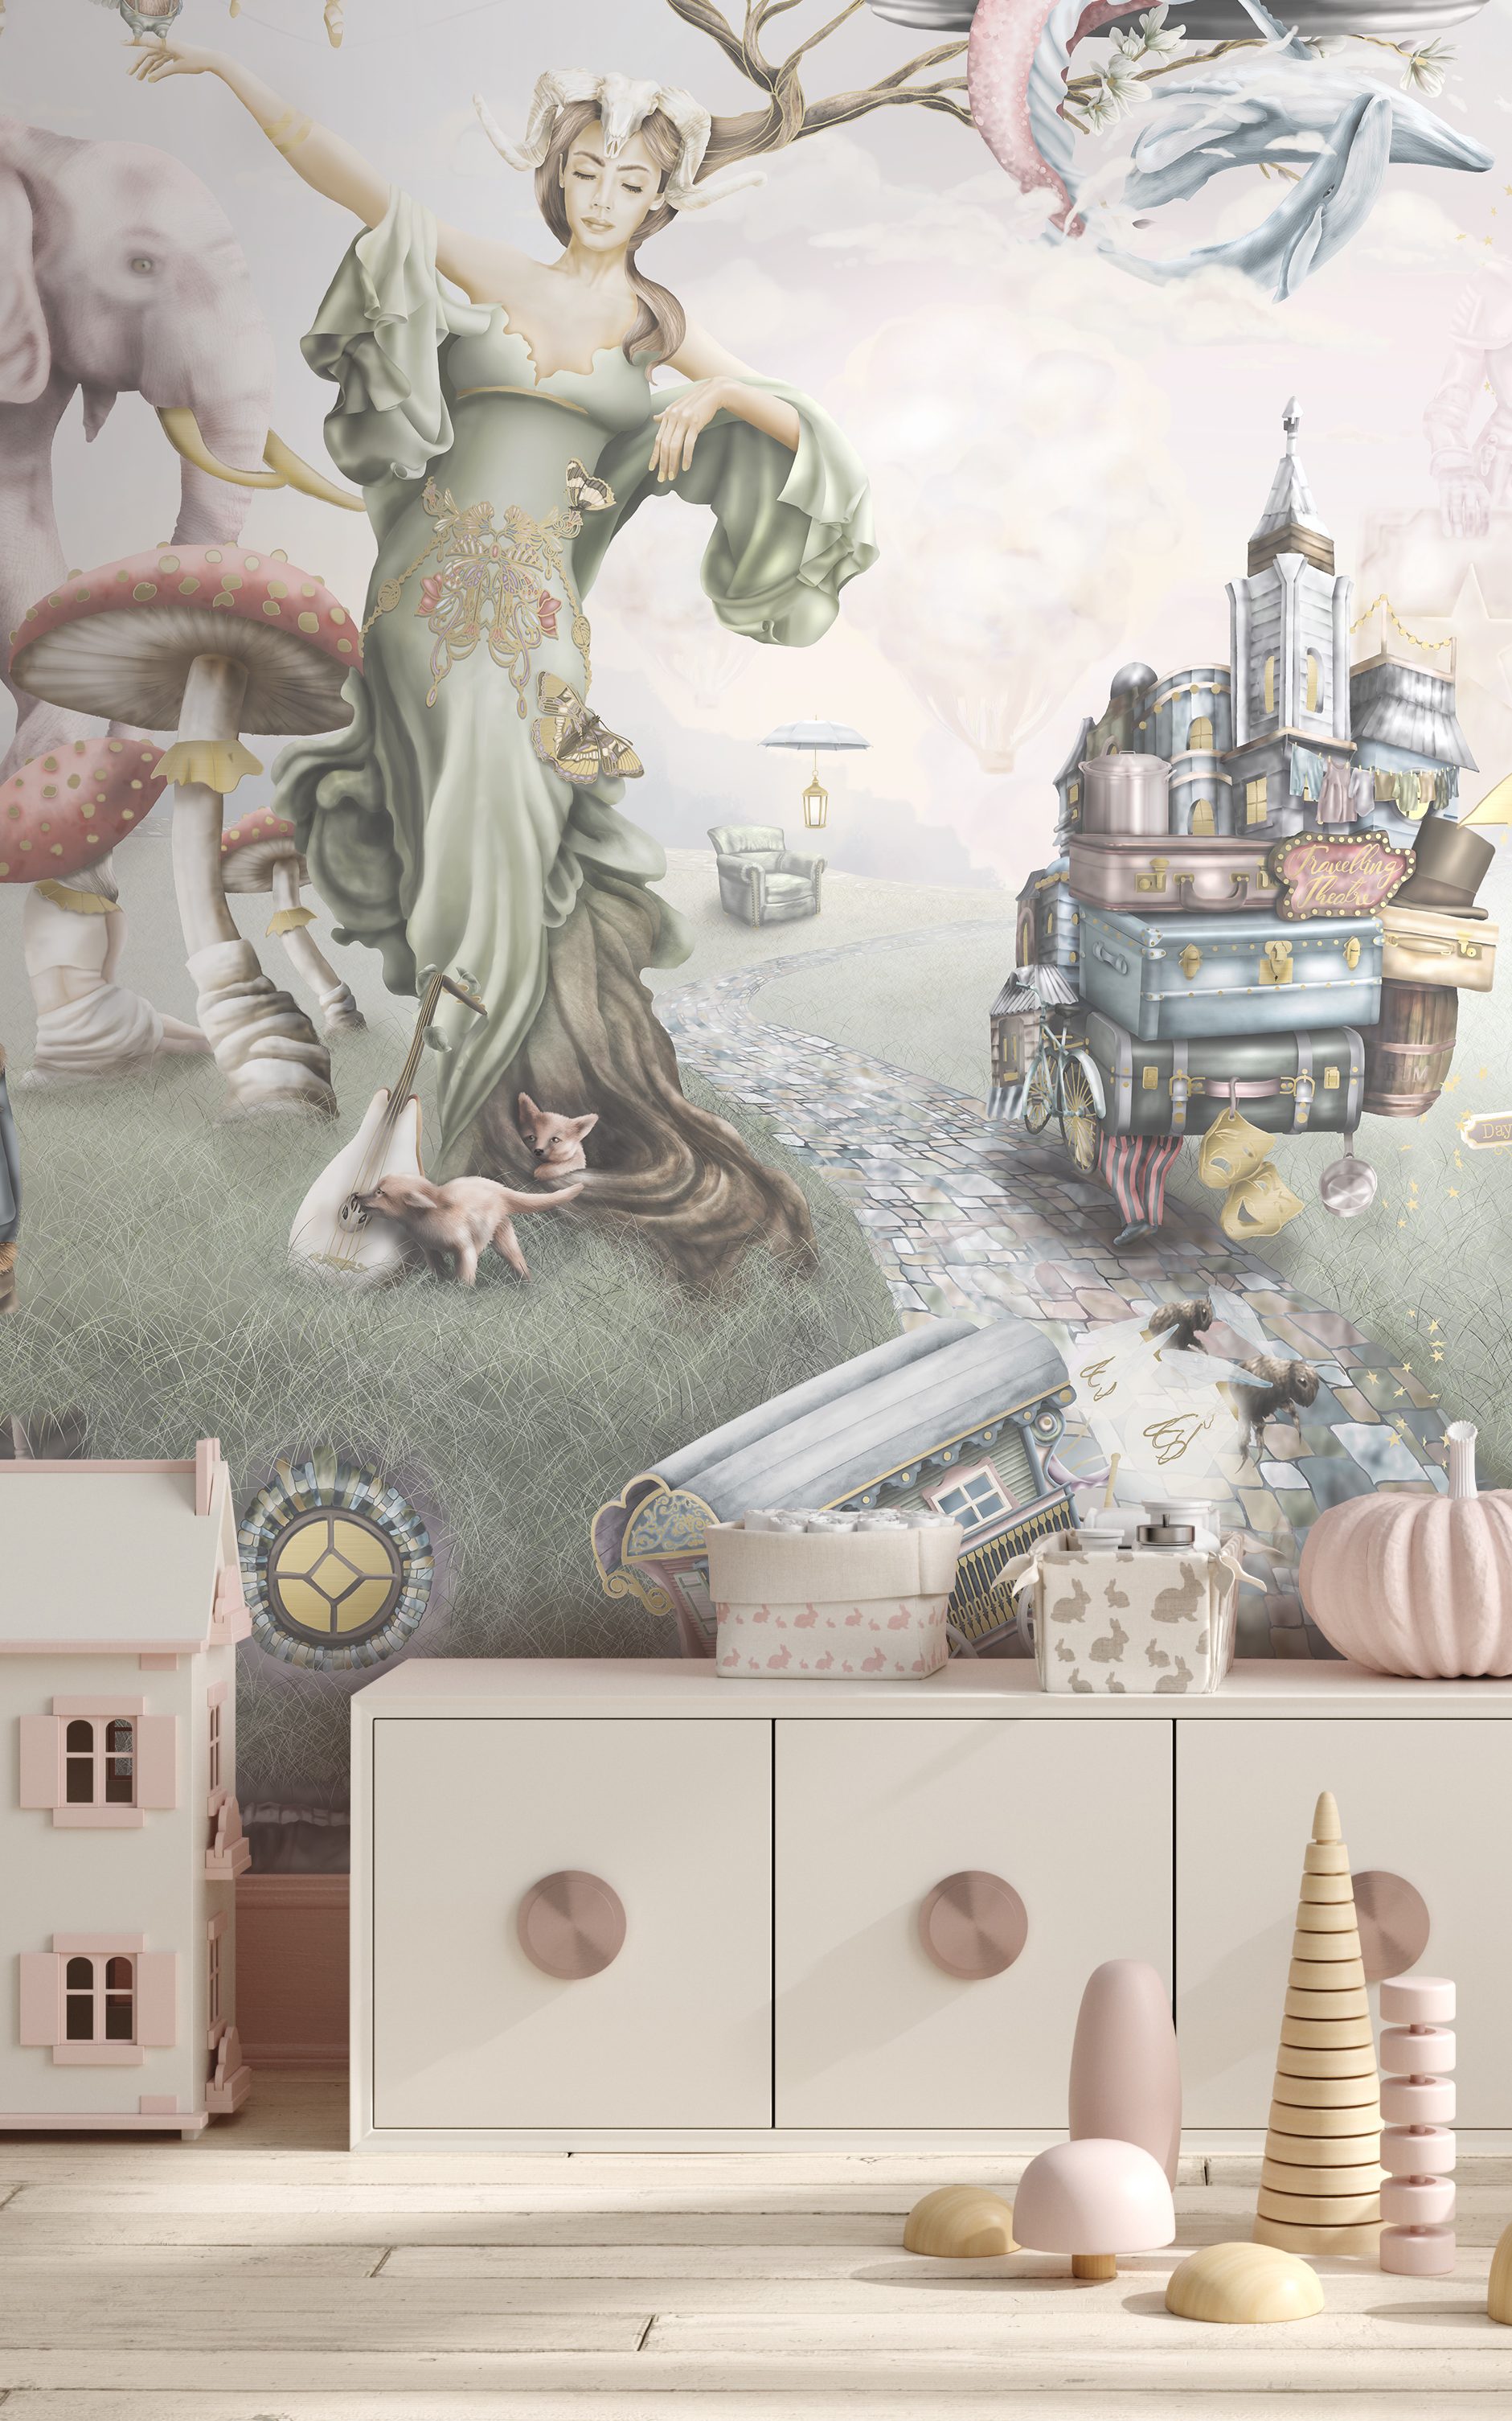 A truly beautiful kids girls interior wallpaper design in a playroom, bedroom or nursery. featuring mermaids and other fairy tale characters such as dragons, mother nature, ballerina, princess and more. In soft washed out, romantic colours.